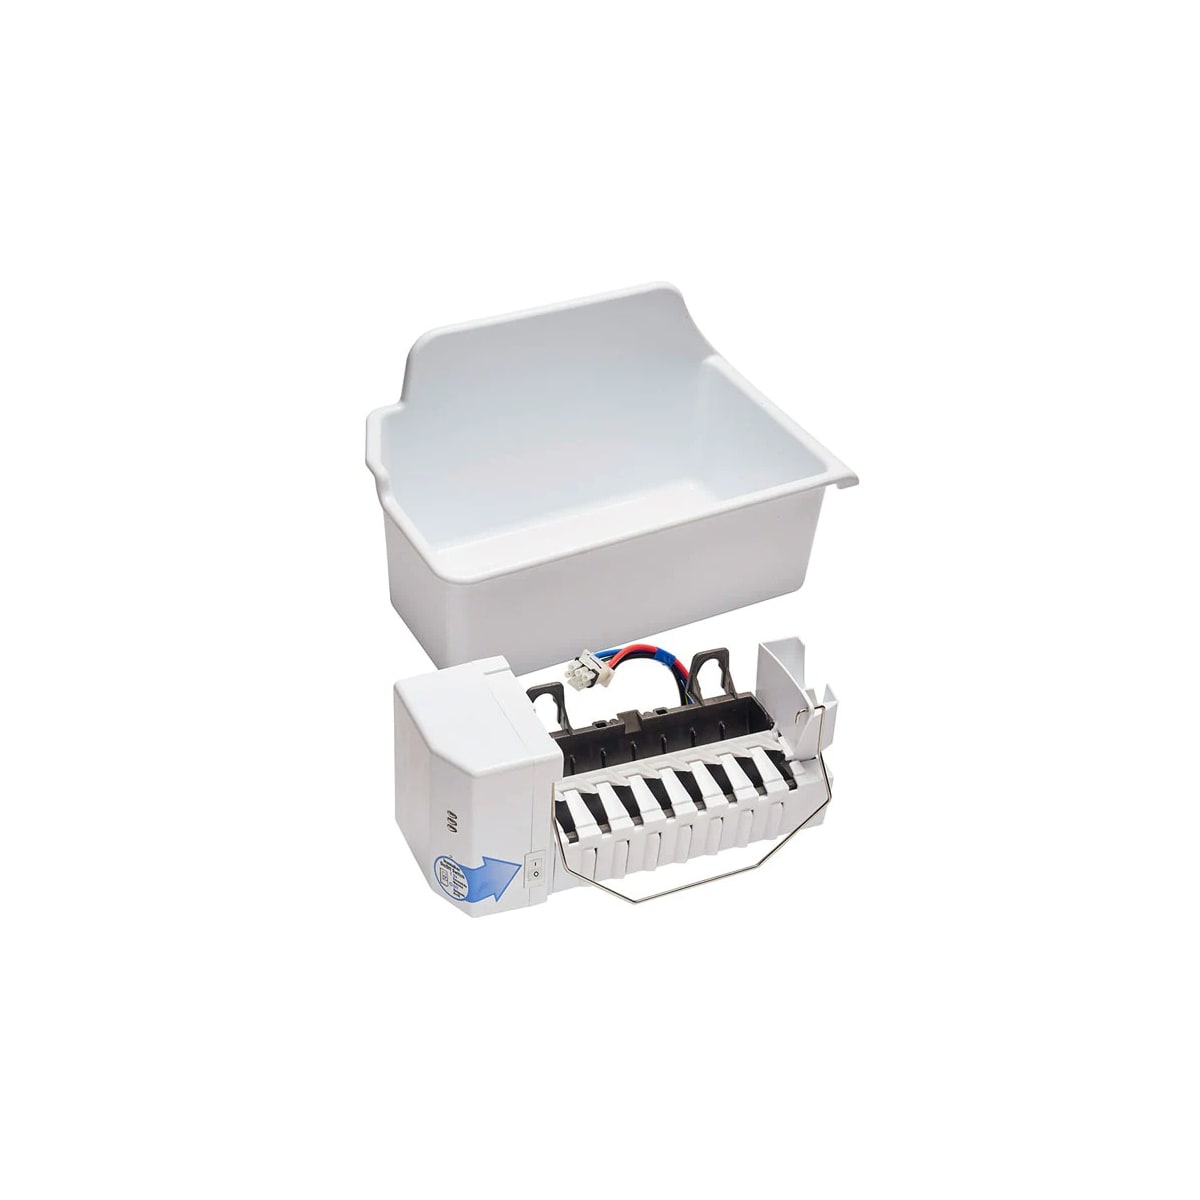 Samsung Quick-Connect Auto Ice Maker Kit